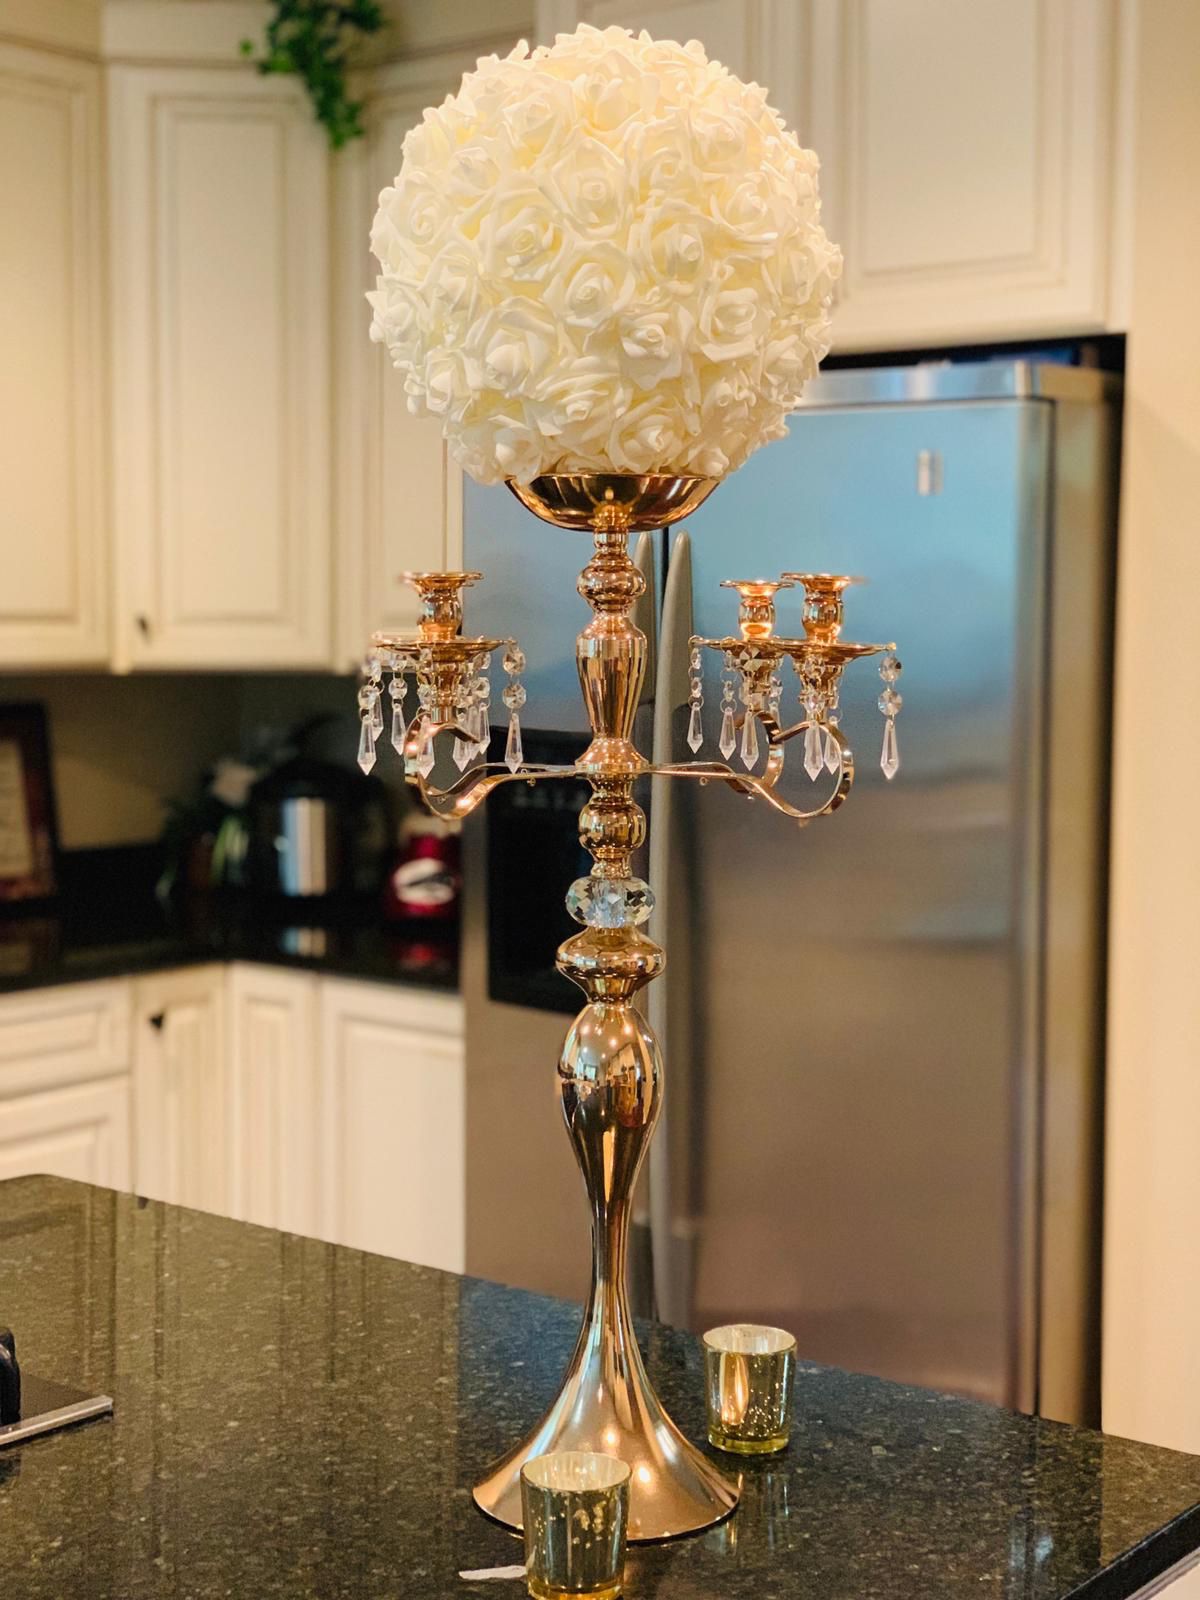 Candelabra with crystals for centerpiece